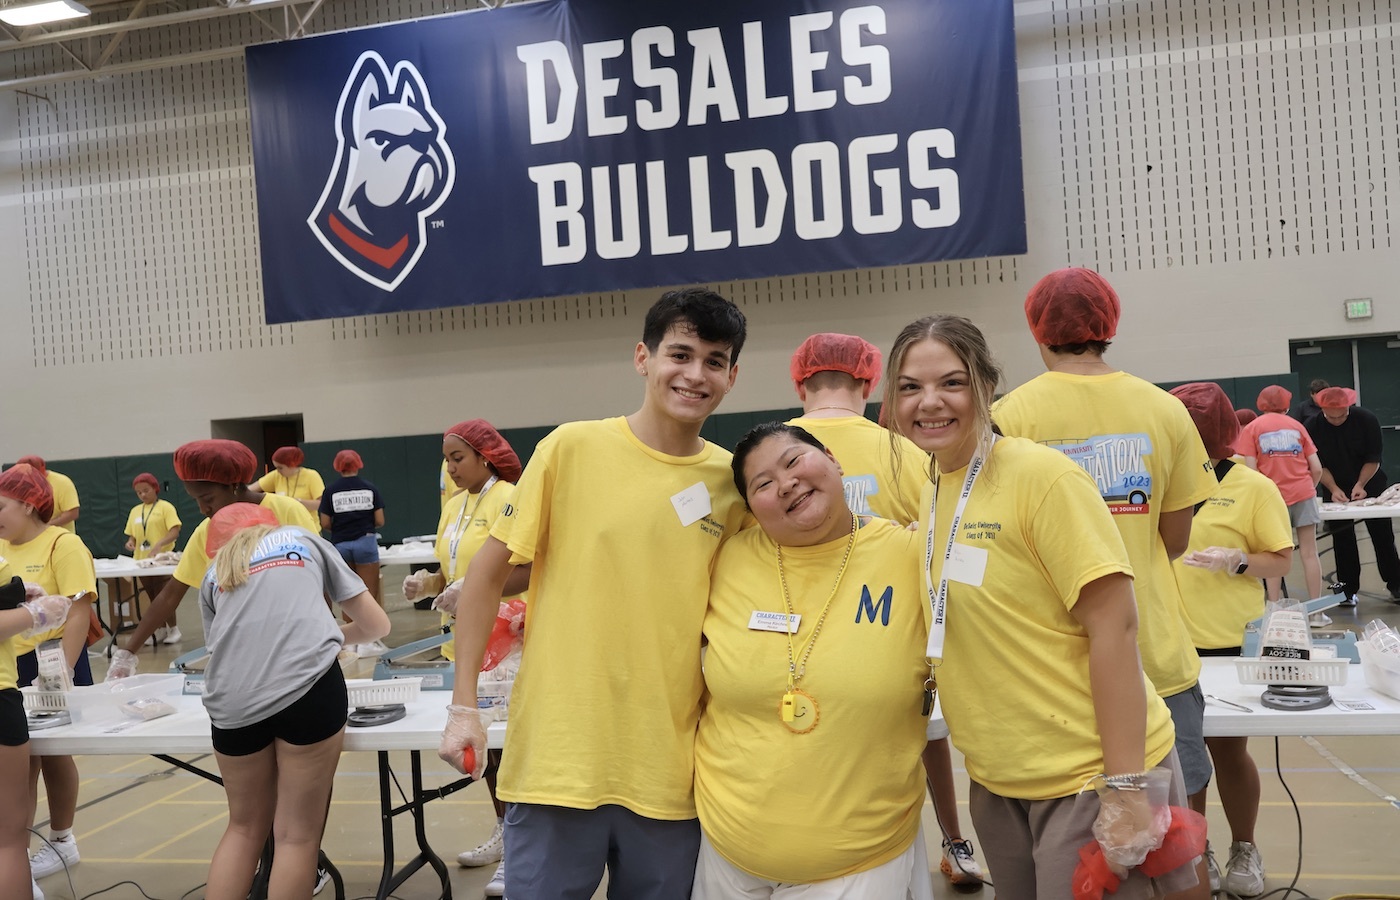 Three first-year students smiling in front of a DeSales Bulldogs banner in a room full of other first-year student volunteers.